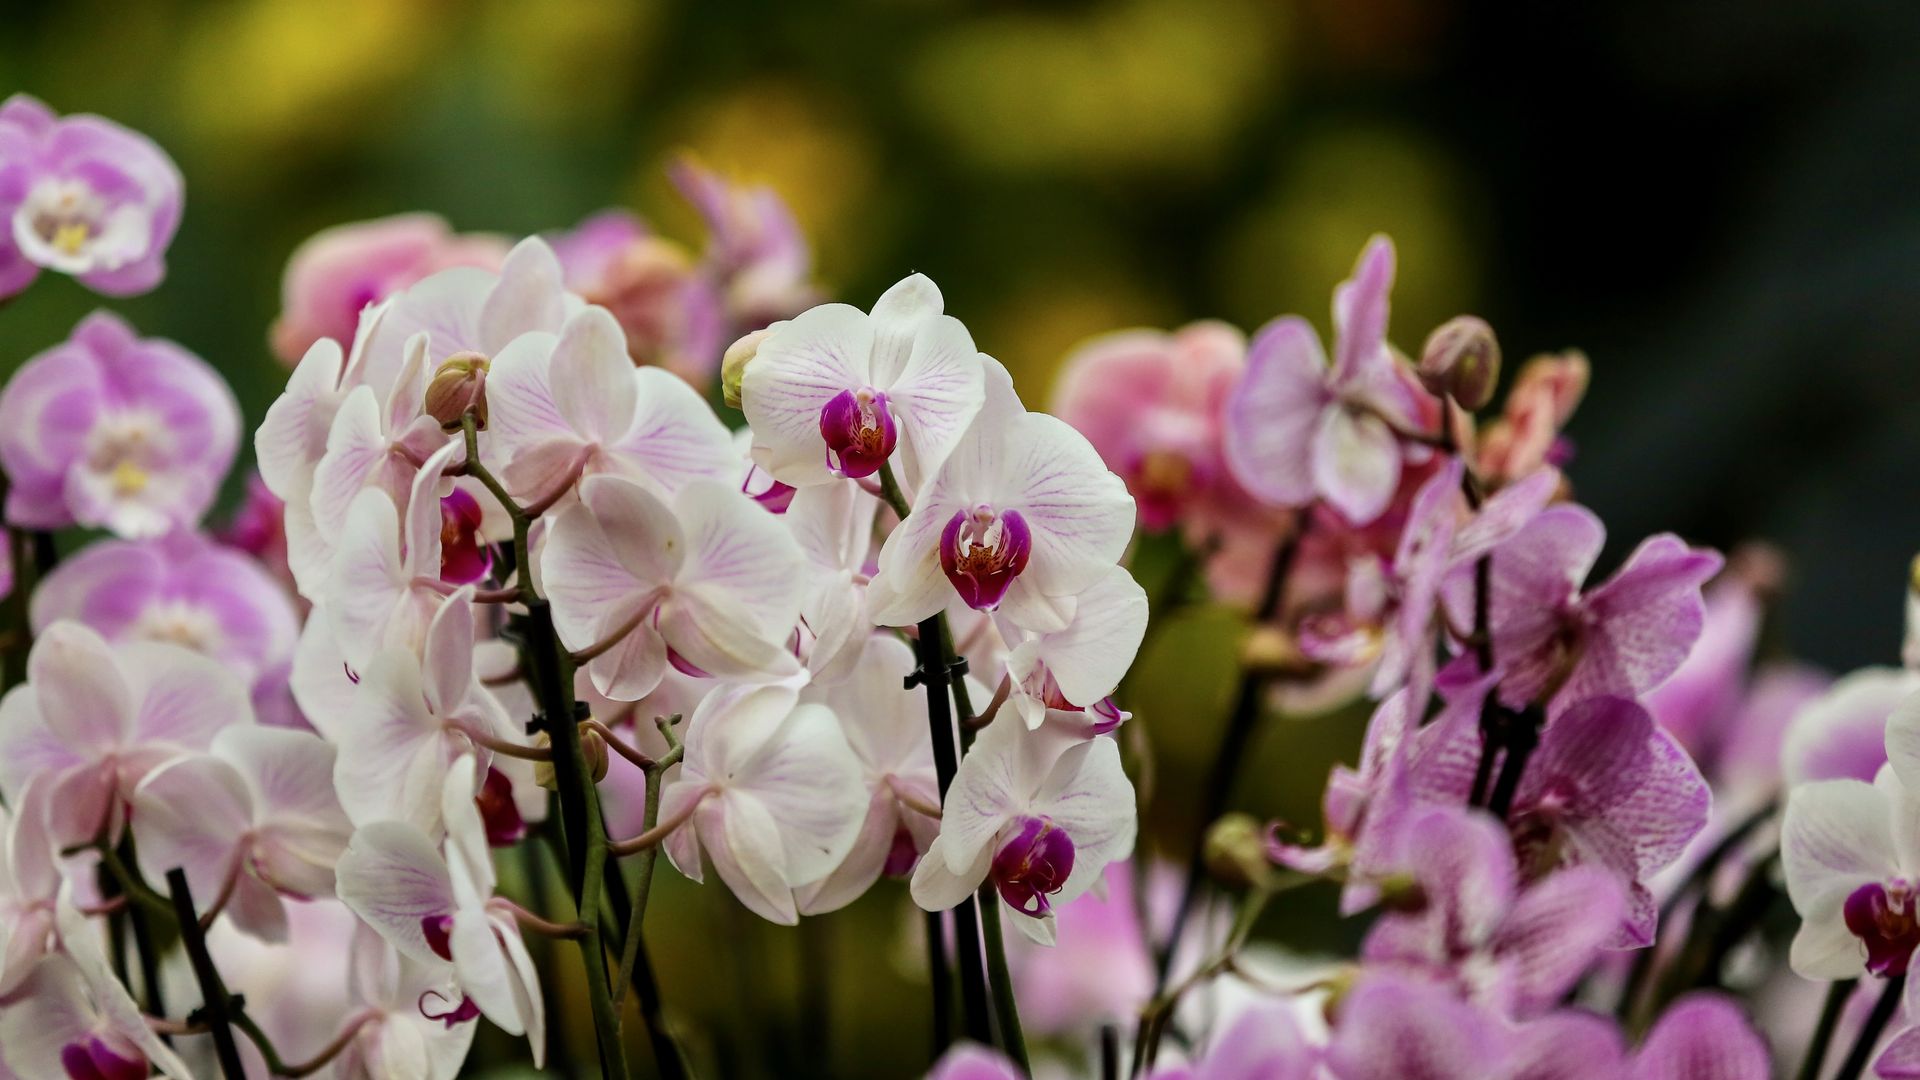 A row of white, pink and purple orchid blossoms